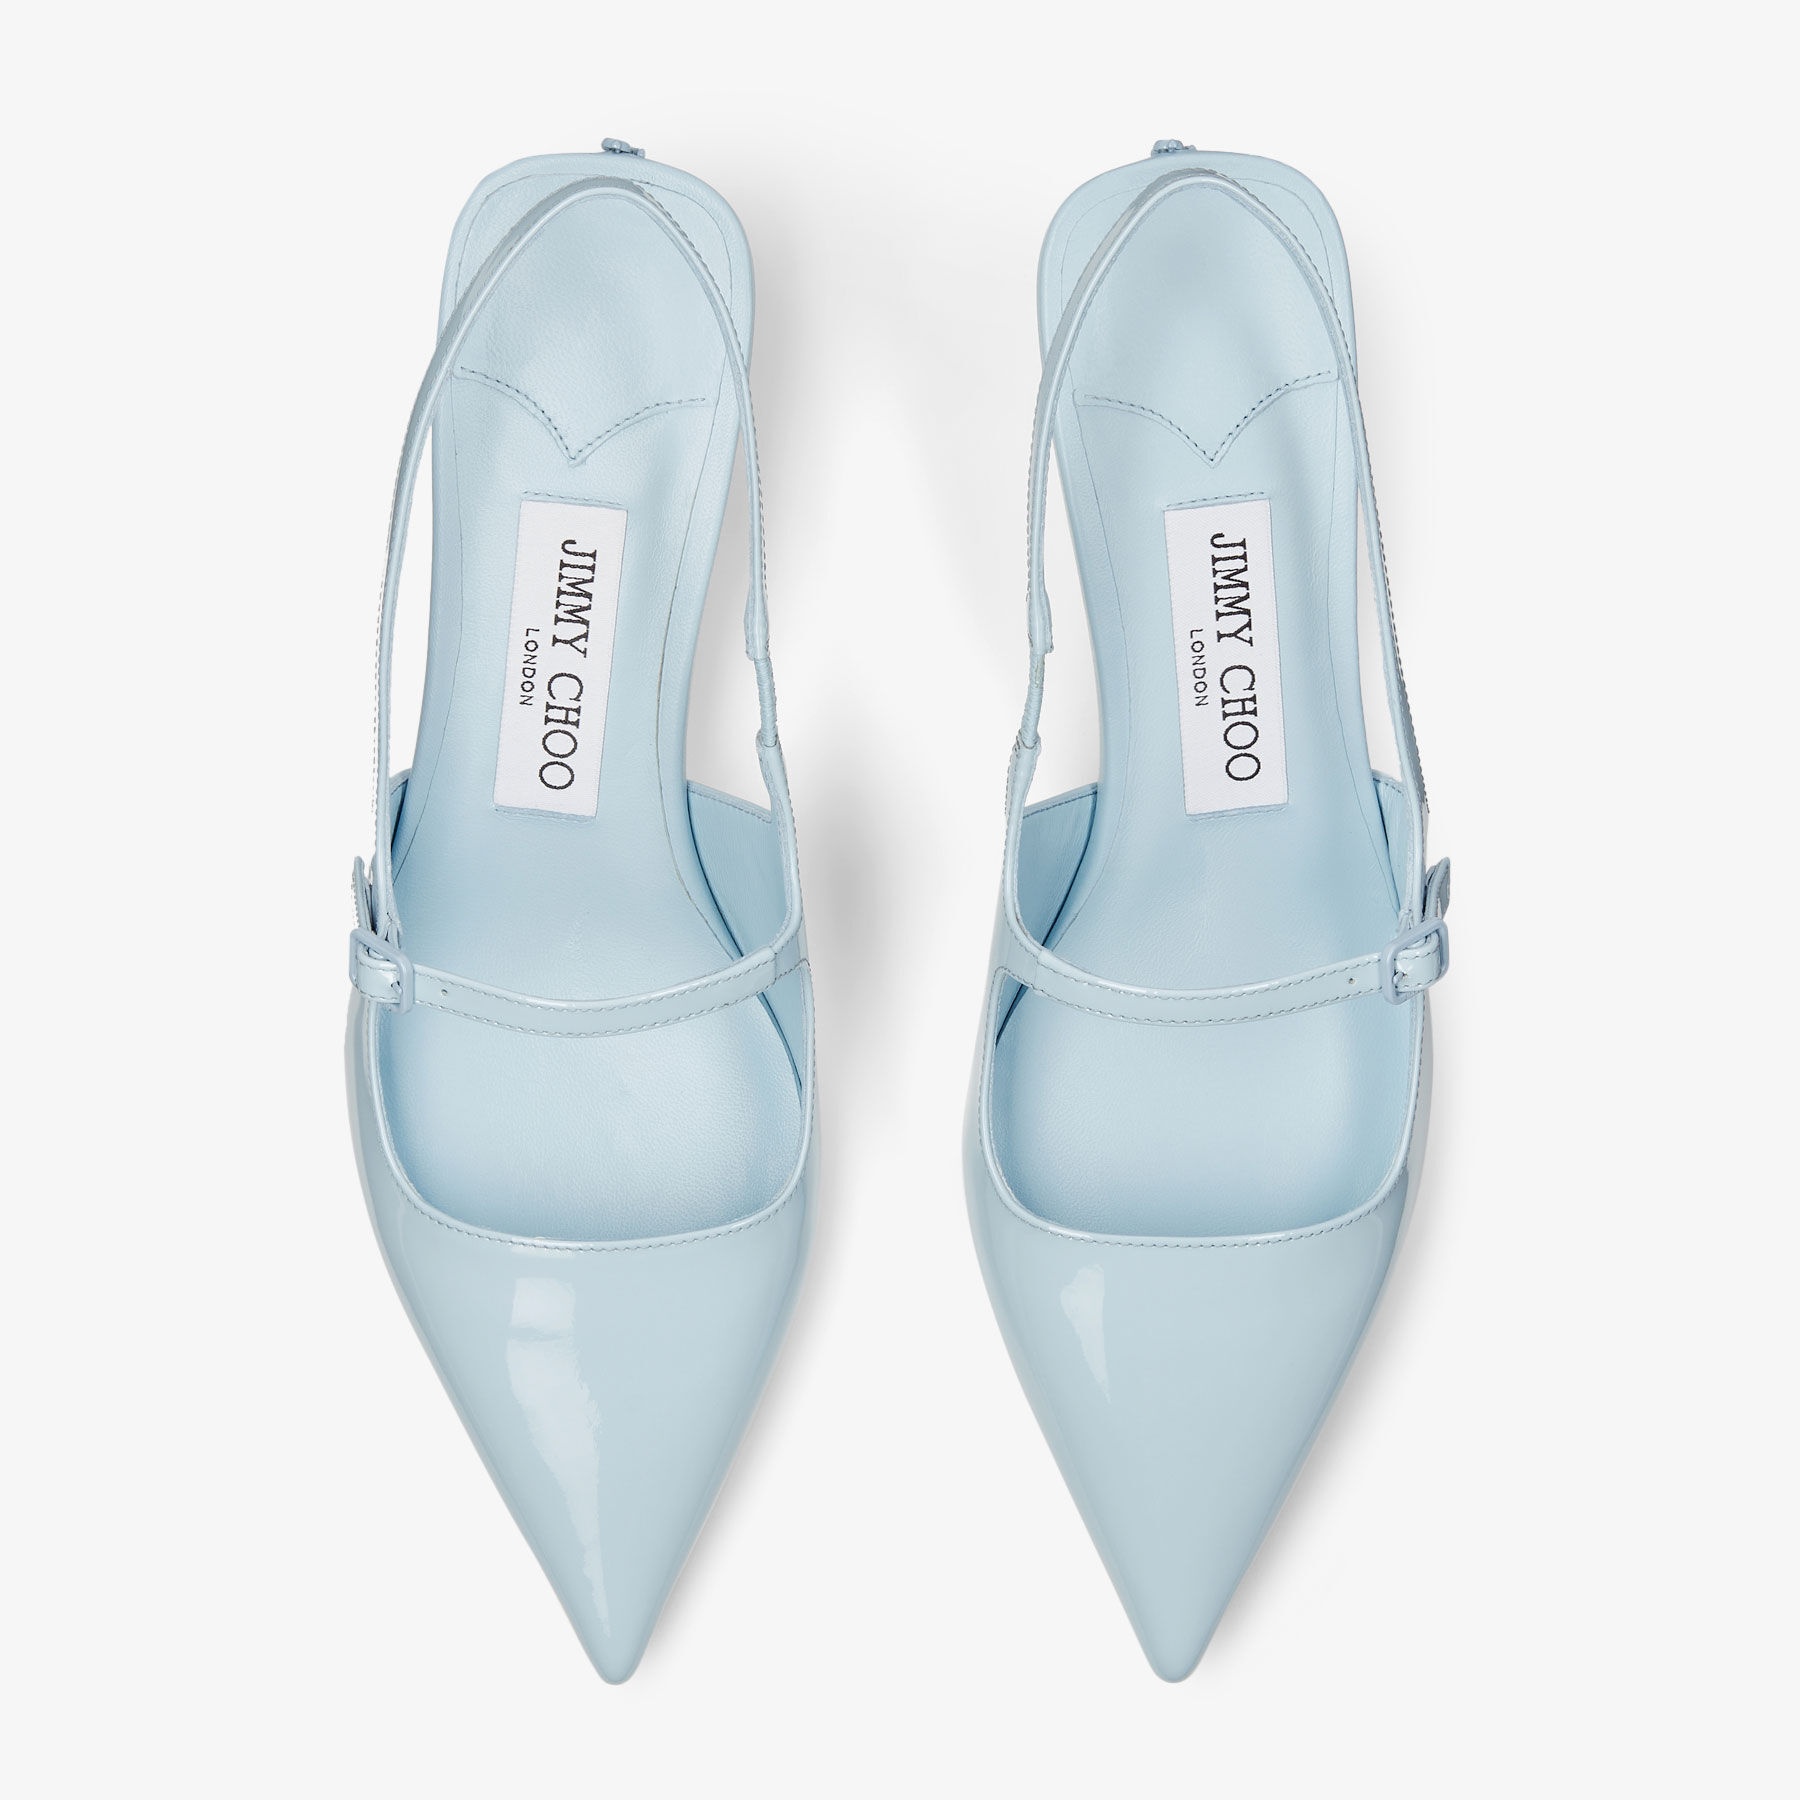 Didi 45
Ice Blue Patent Leather Pointed Pumps - 4